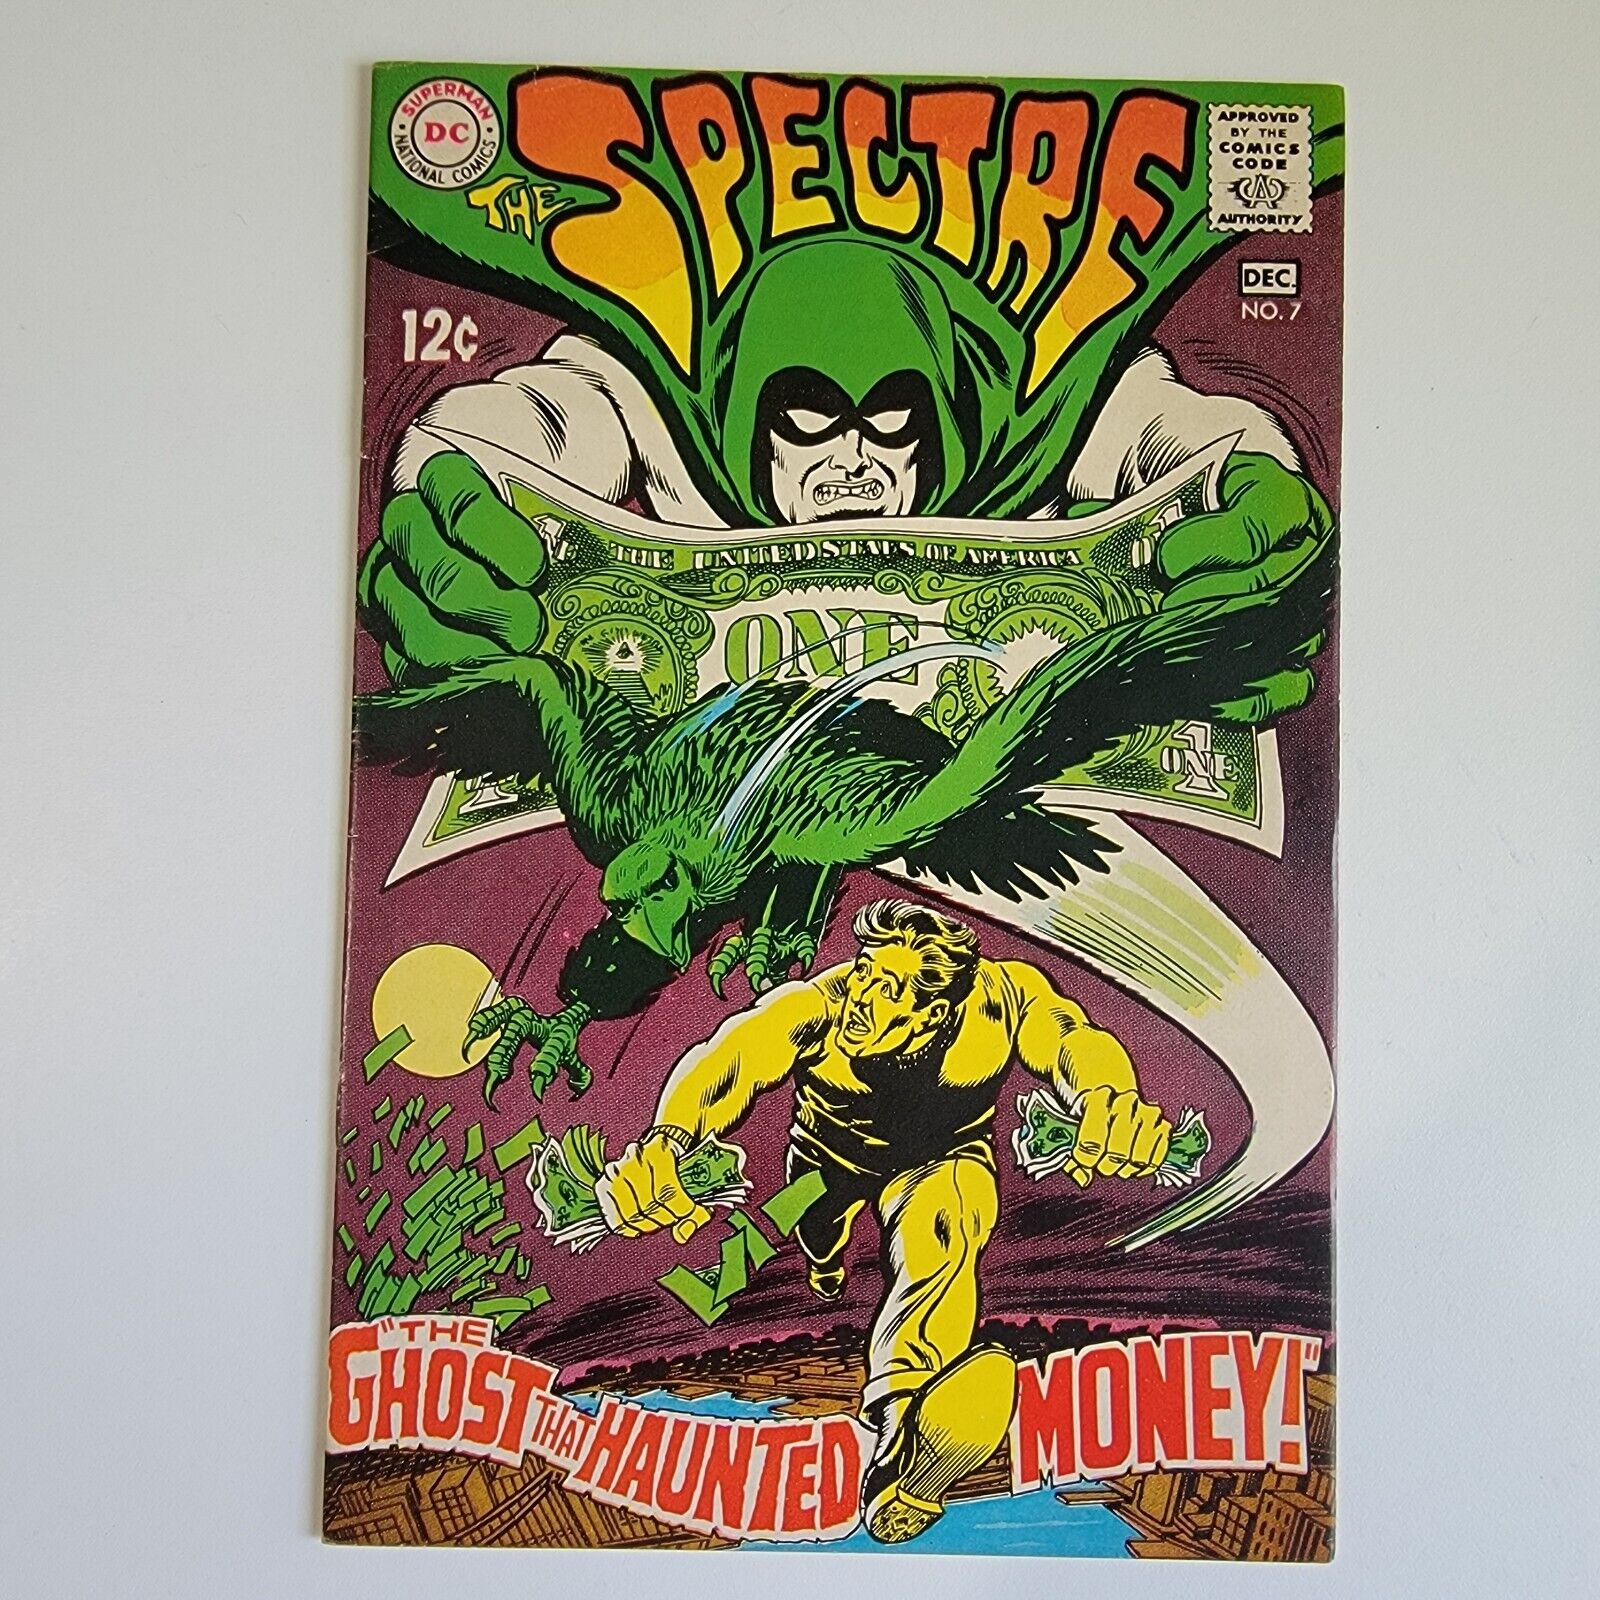 The Spectre #7 DC Comics 1968 The Ghost That Haunted Money